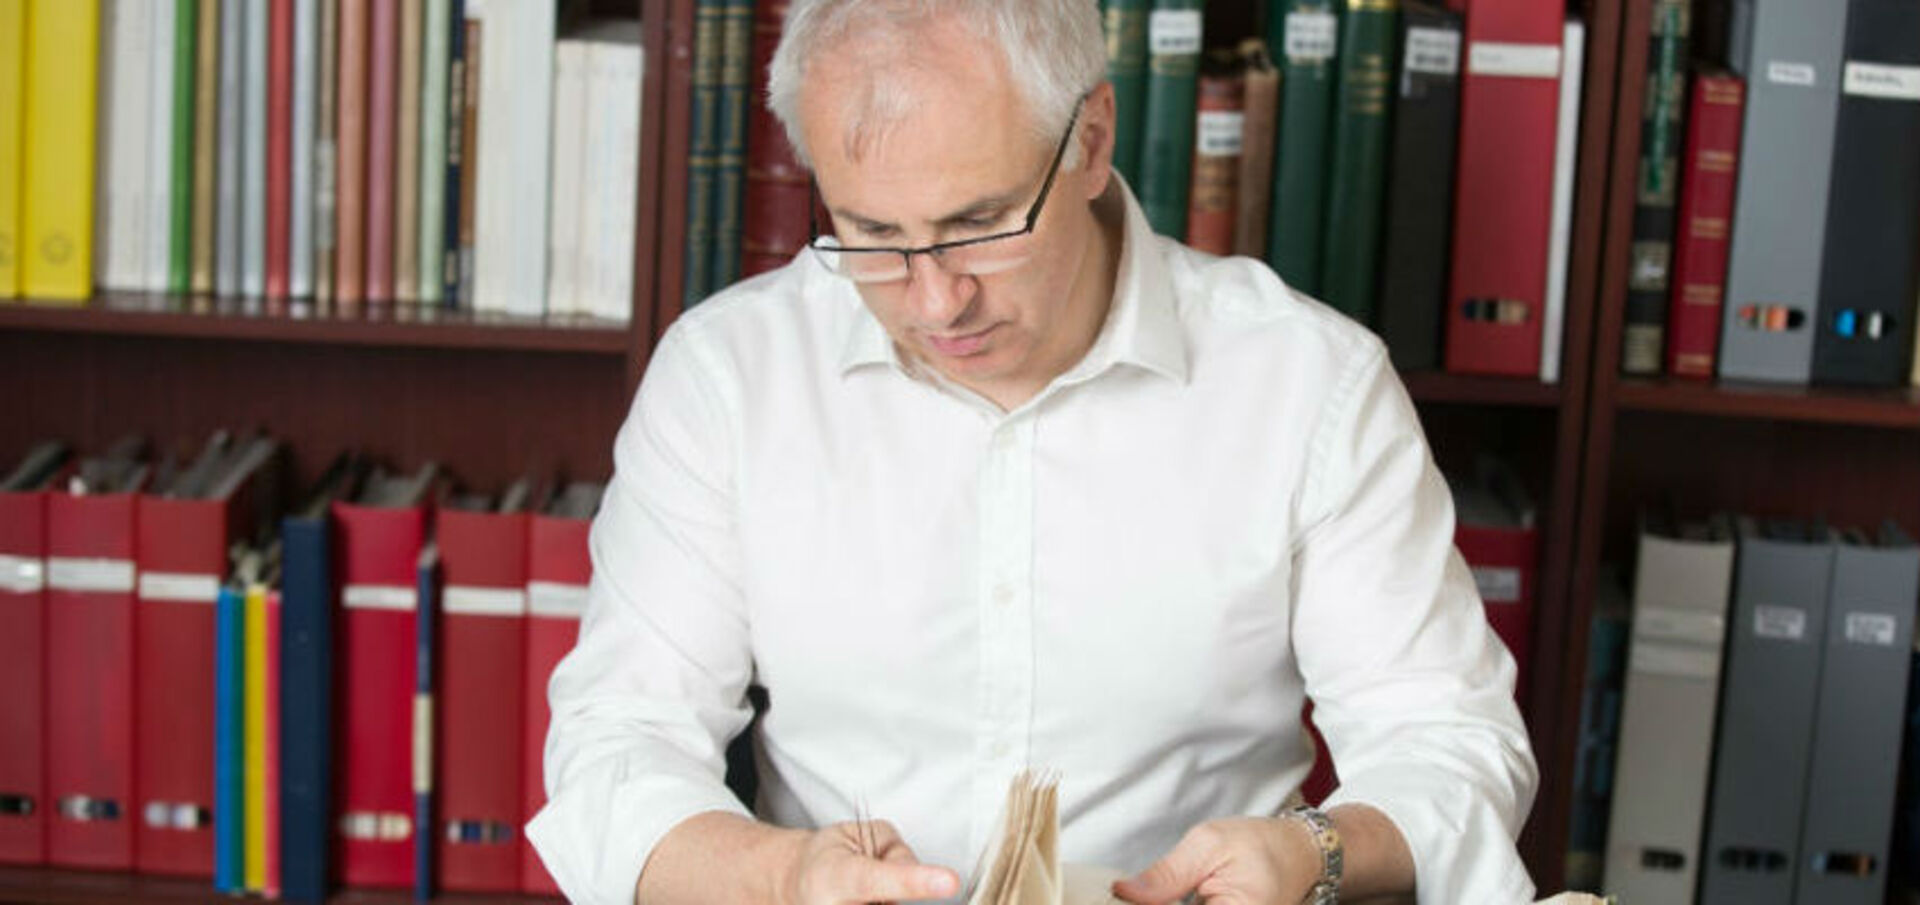 Vincent Green, chairman of Sandafayre, analysing stamp collections